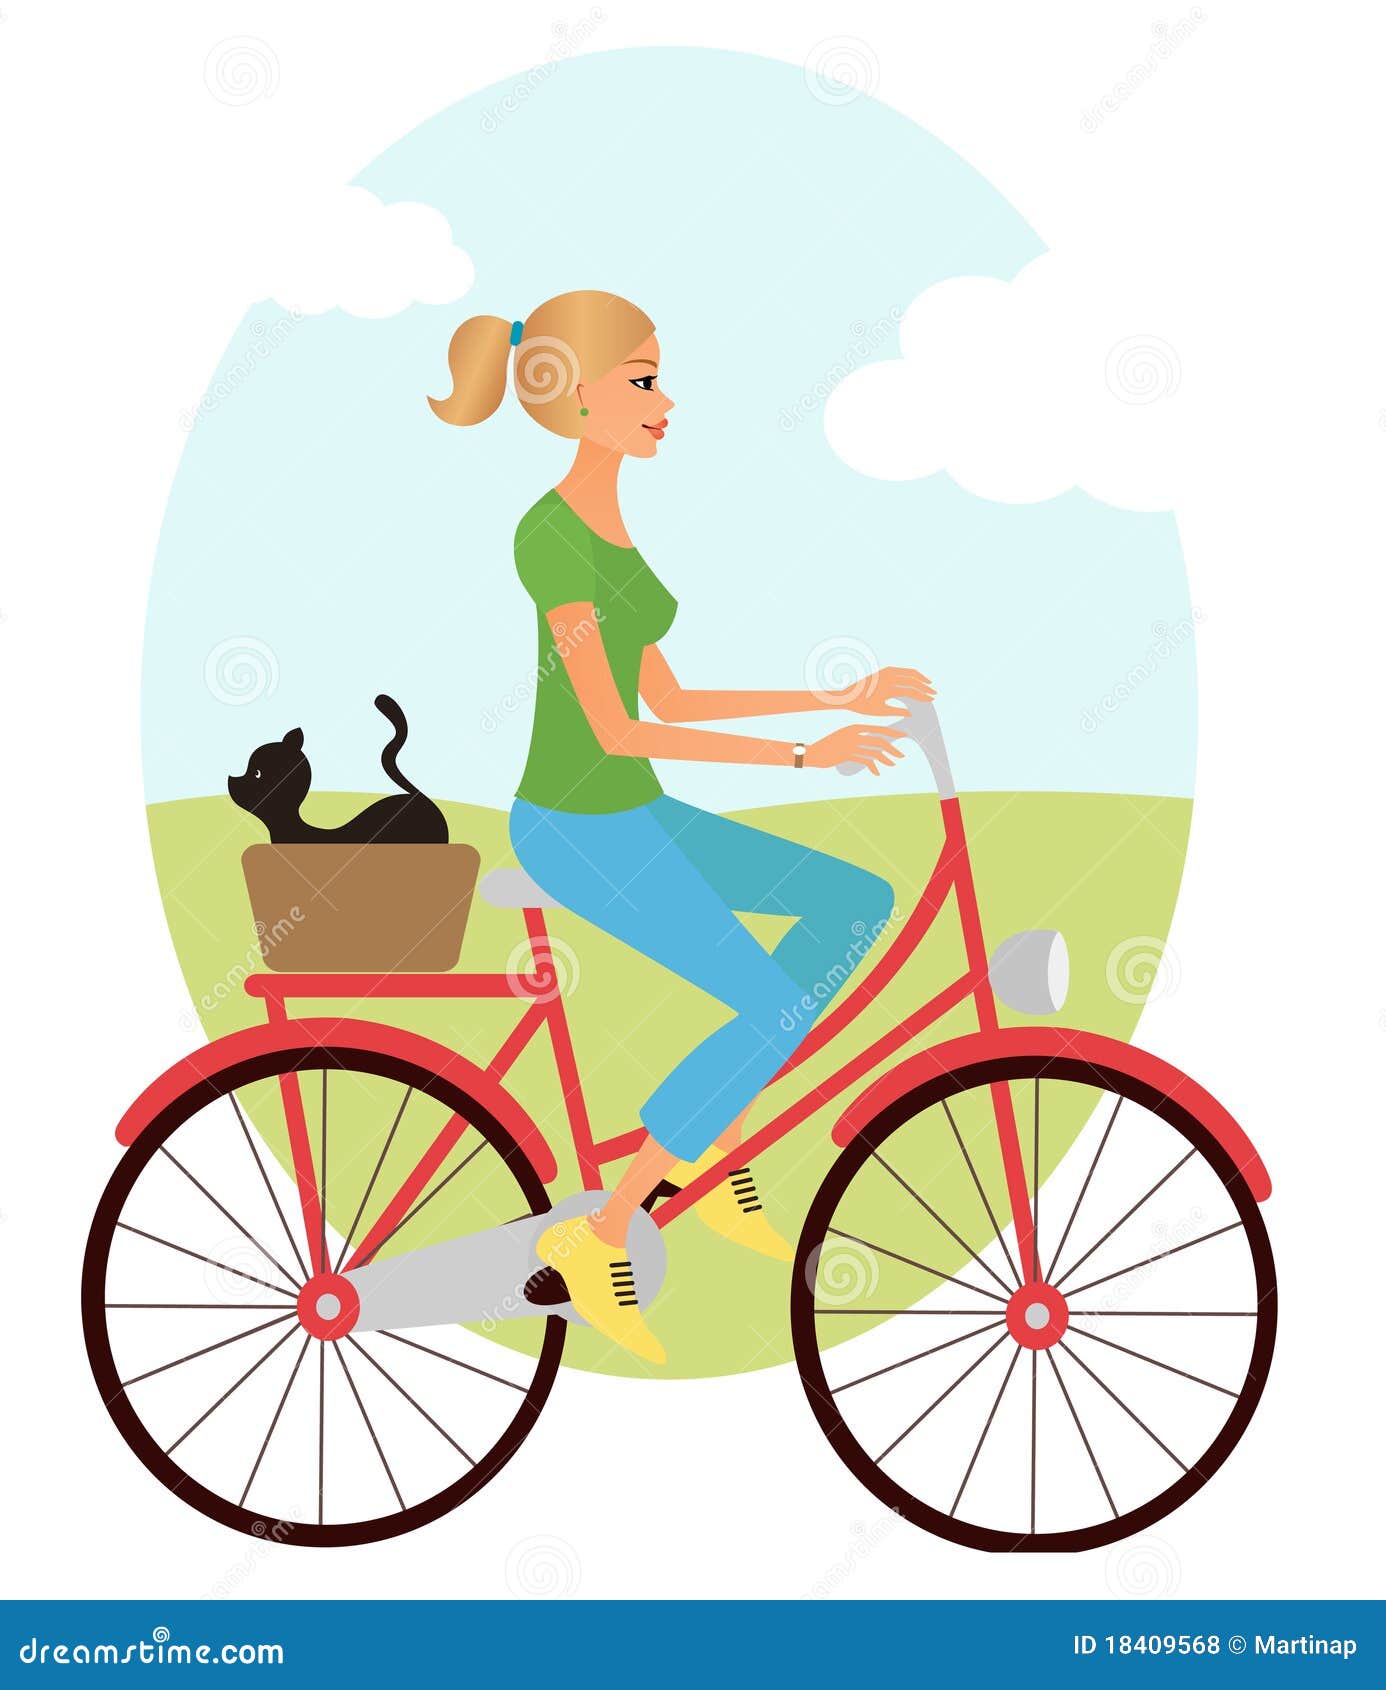 free clip art woman on bicycle - photo #47